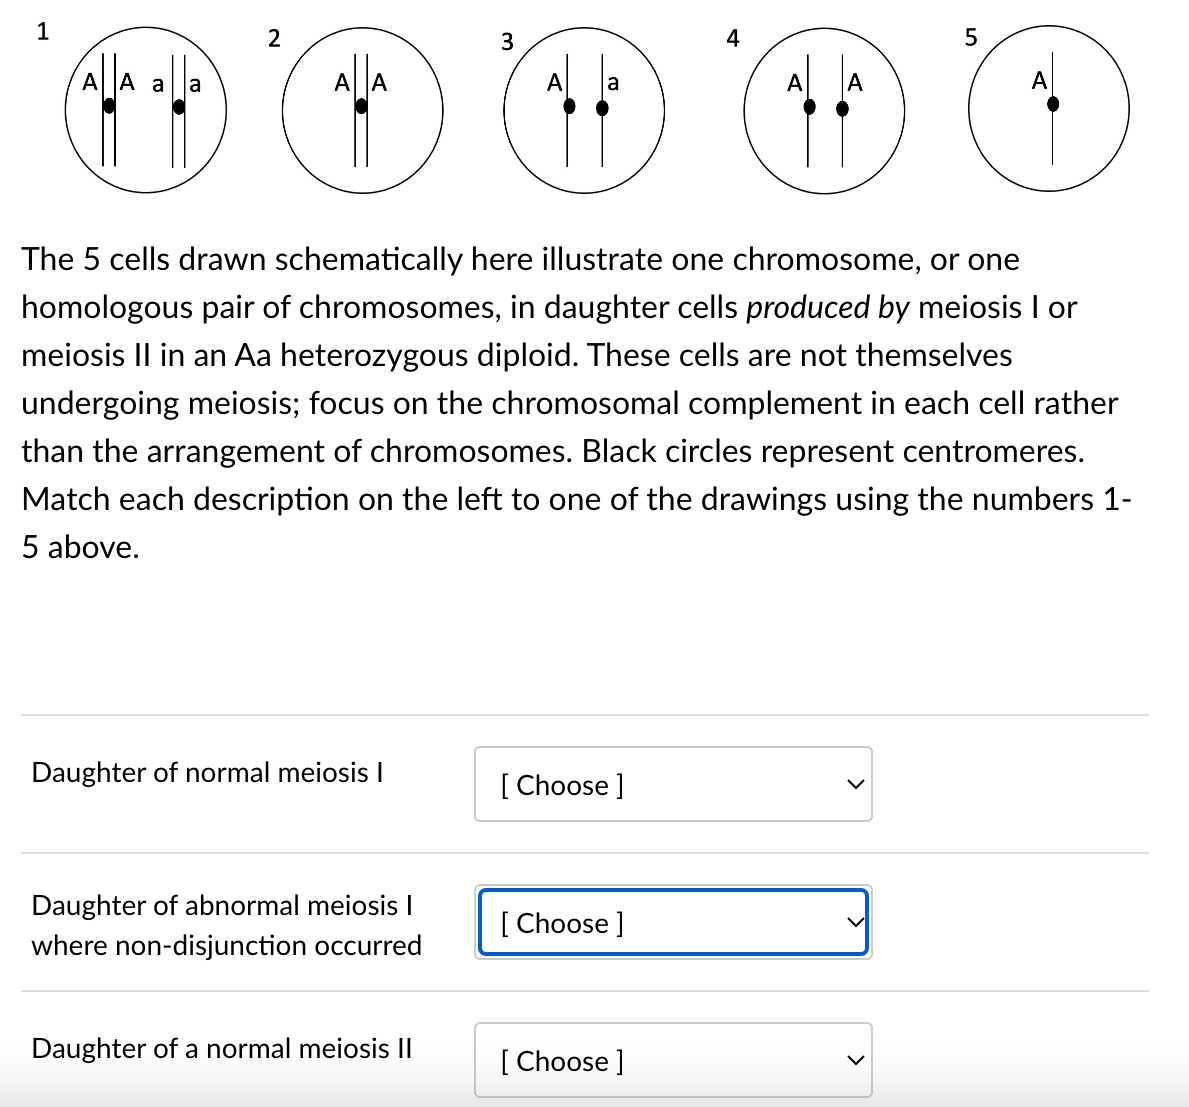 1
A
a
2
AllA
Daughter of normal meiosis I
Daughter of abnormal meiosis I
where non-disjunction occurred
3
Daughter of a normal meiosis II
The 5 cells drawn schematically here illustrate one chromosome, or one
homologous pair of chromosomes, in daughter cells produced by meiosis I or
meiosis II in an Aa heterozygous diploid. These cells are not themselves
undergoing meiosis; focus on the chromosomal complement in each cell rather
than the arrangement of chromosomes. Black circles represent centromeres.
Match each description on the left to one of the drawings using the numbers 1-
5 above.
[Choose ]
[Choose ]
A
[Choose ]
A
5